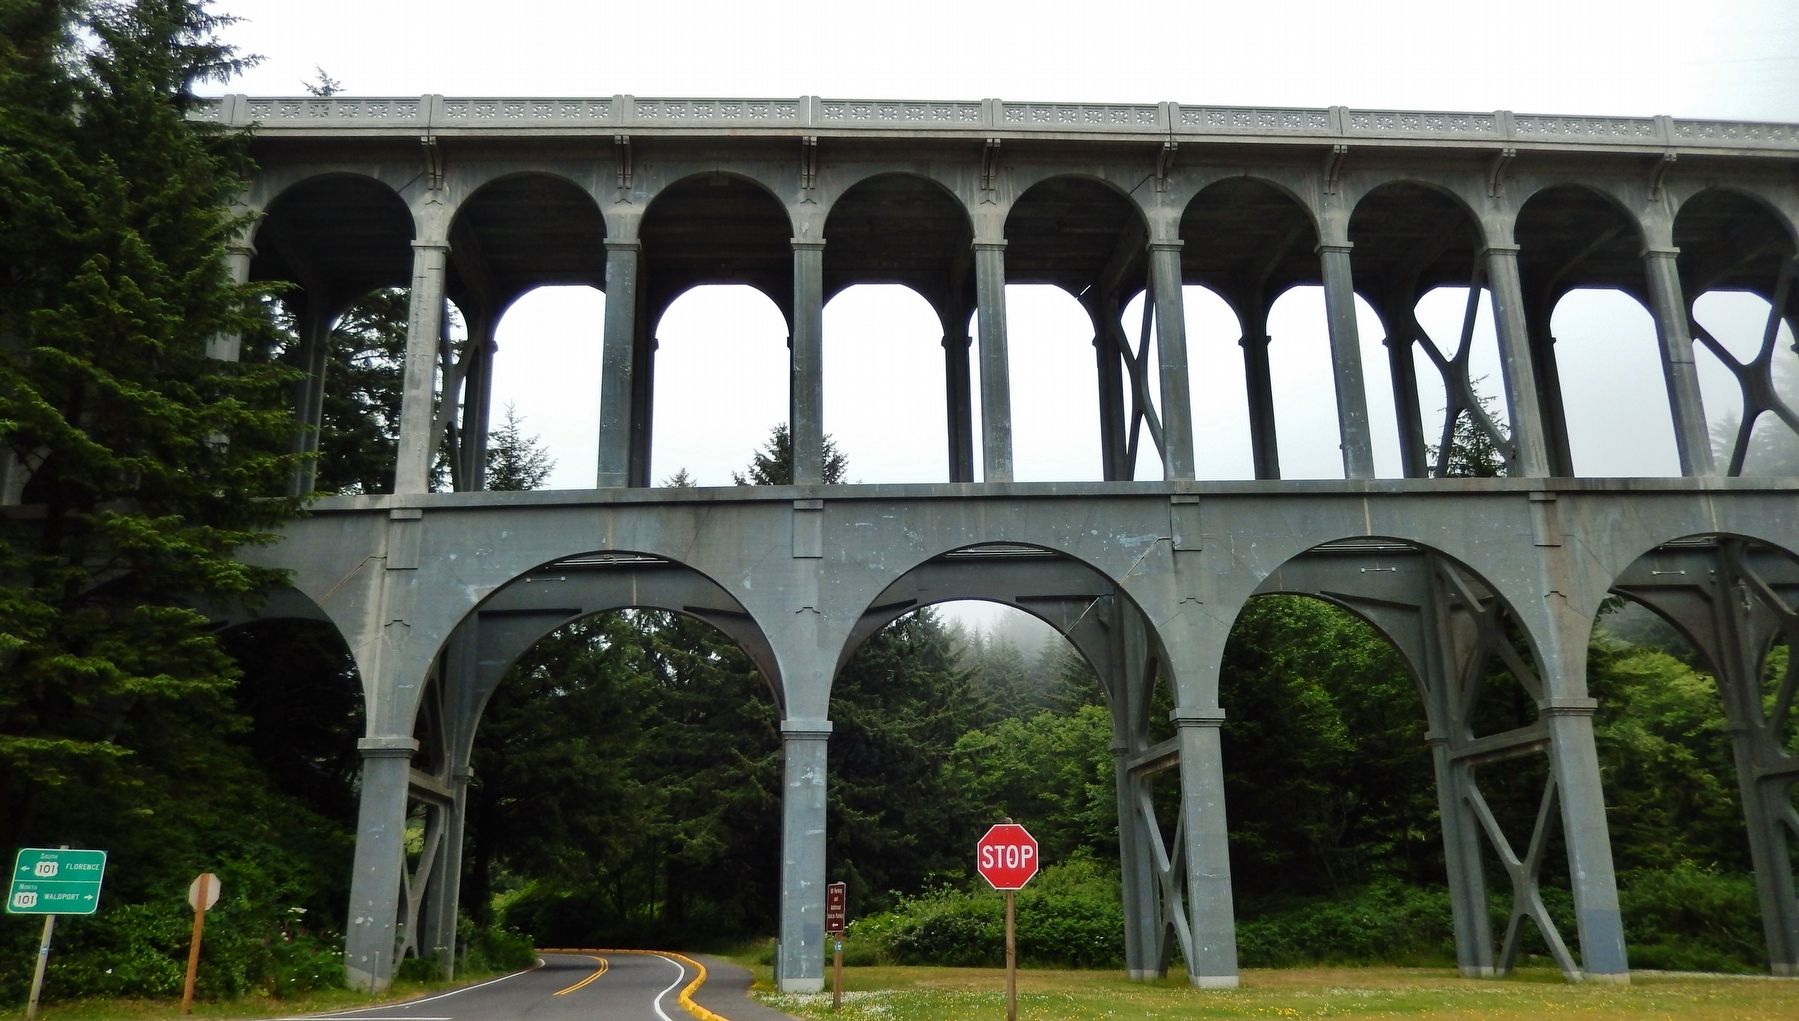 Cape Creek Bridge (<i>west side of bridge as viewed from marker</i>) image. Click for full size.